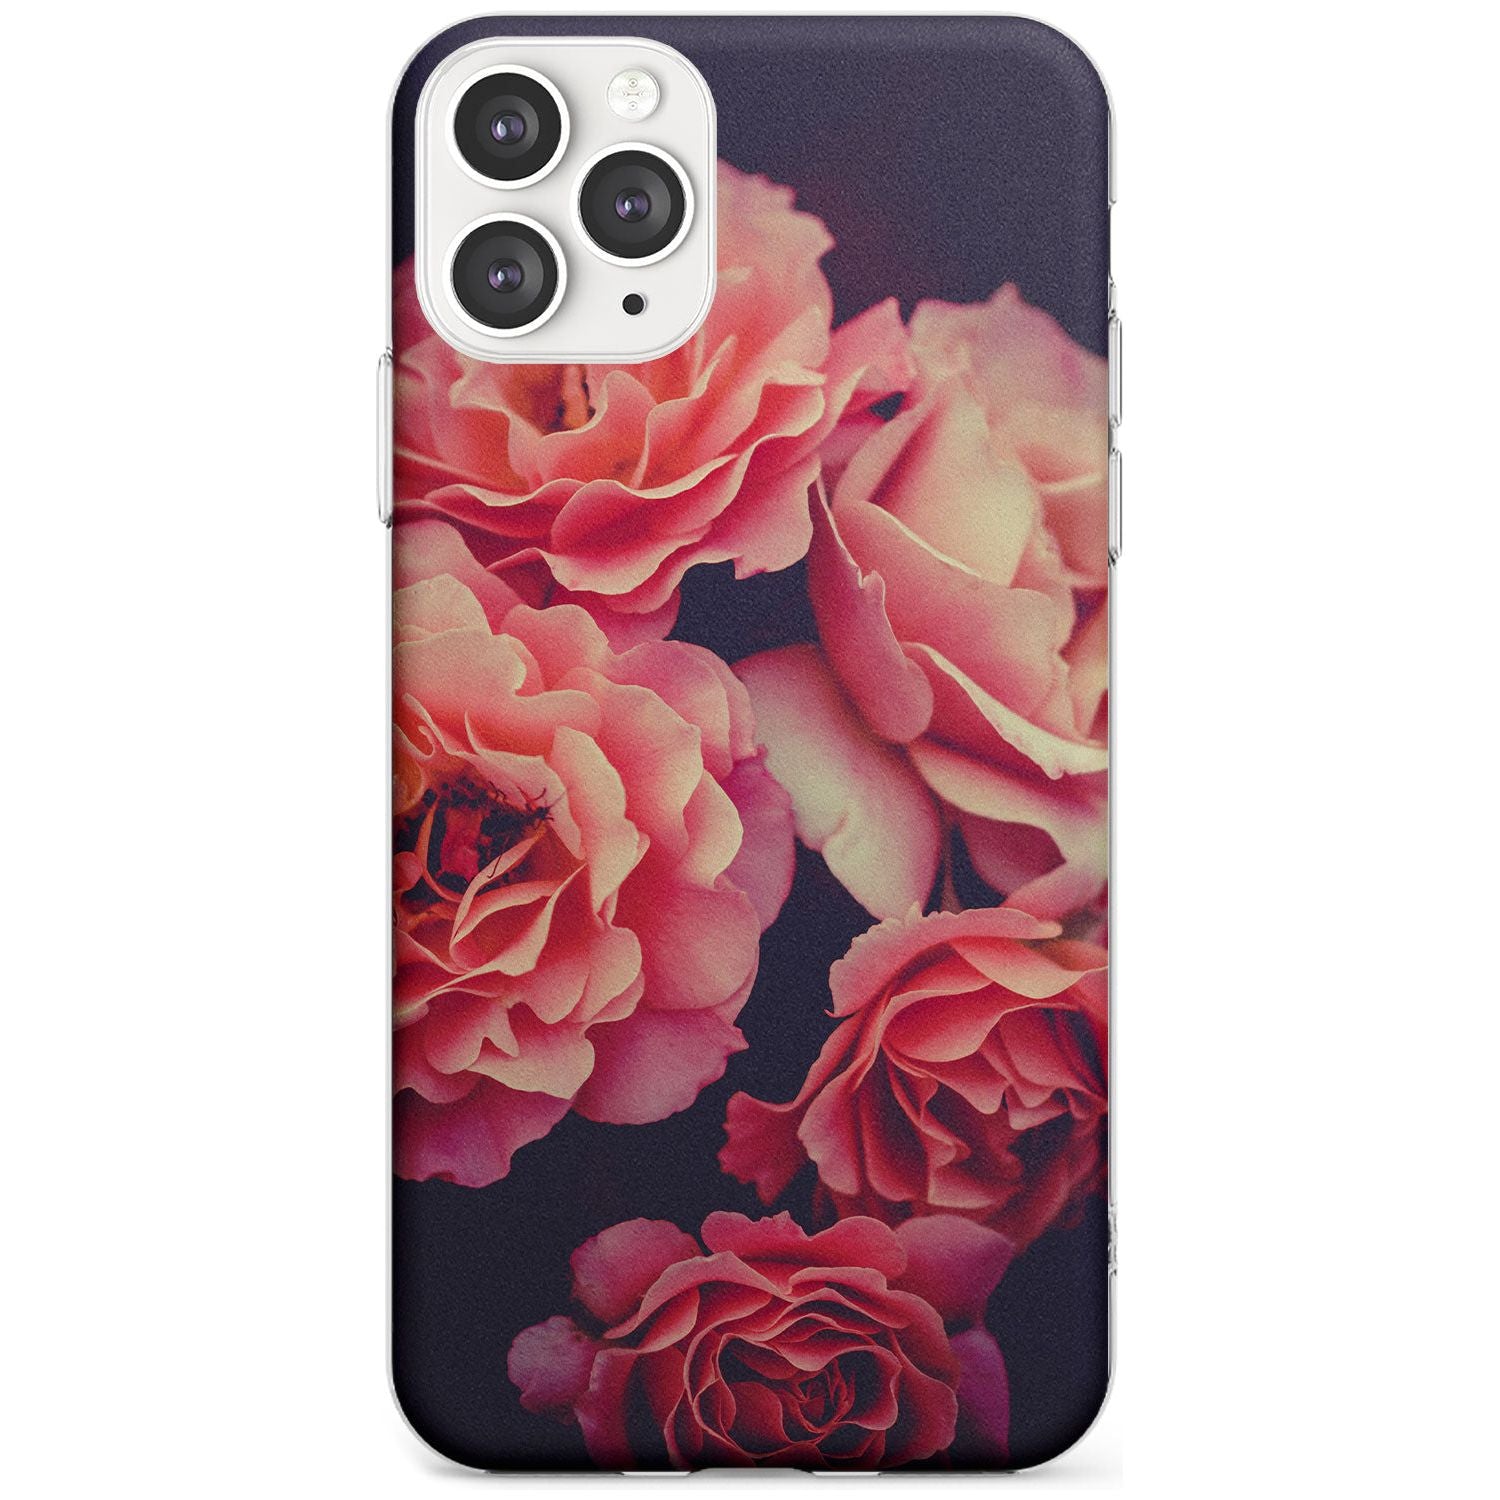 Pink Roses Photograph Slim TPU Phone Case for iPhone 11 Pro Max